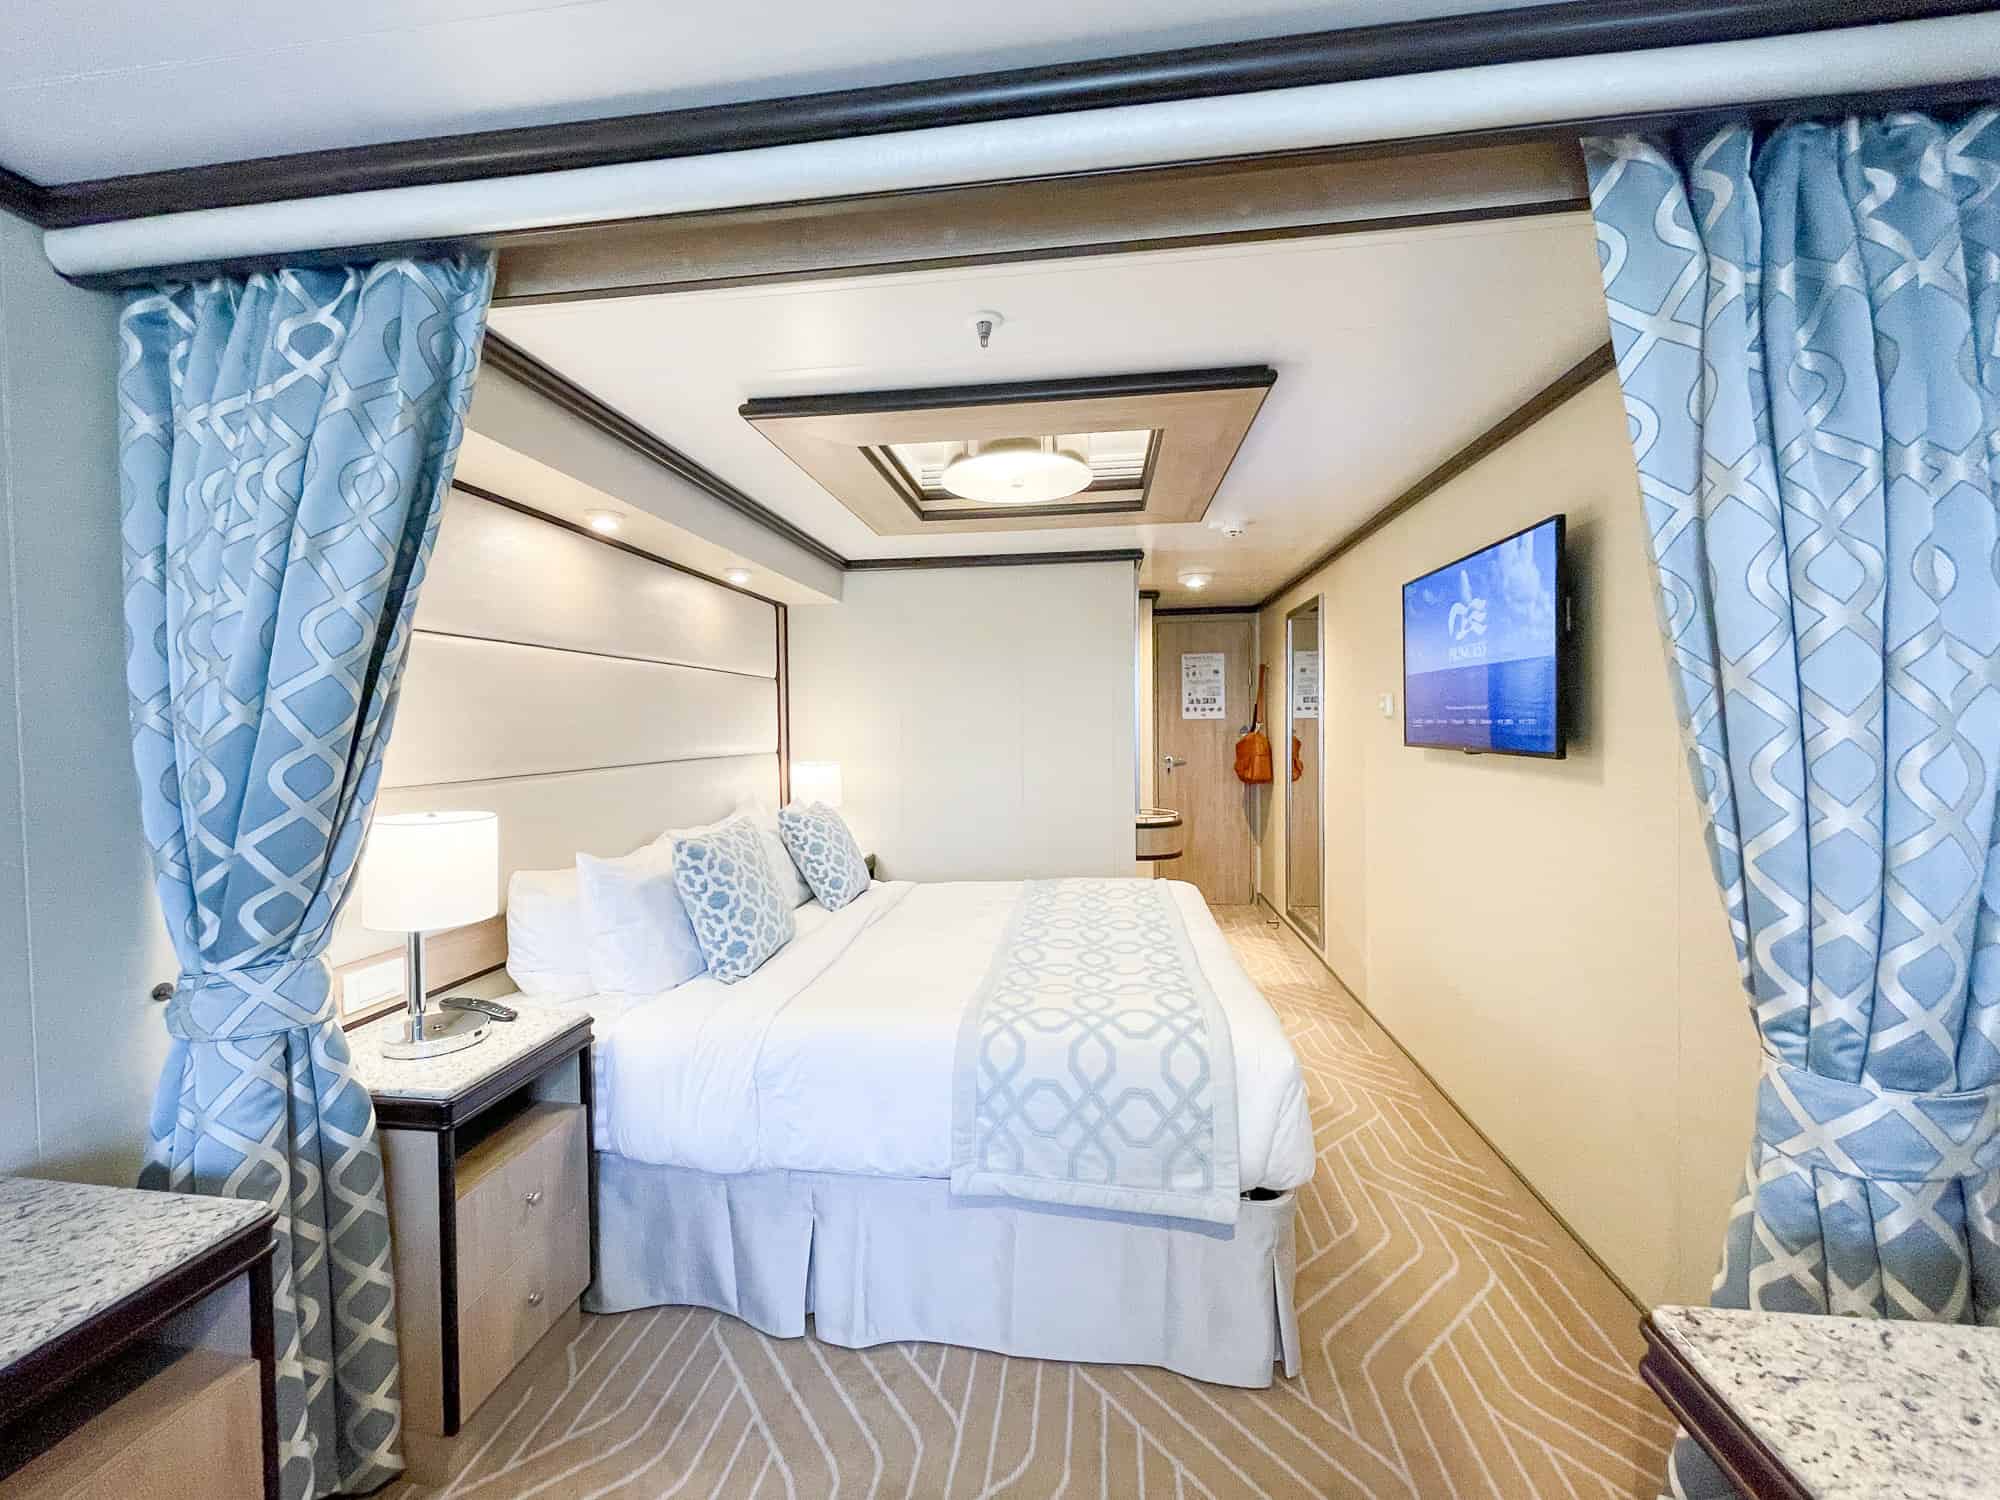 Discovery Princess Review - Mini-Suite Bedroom Area